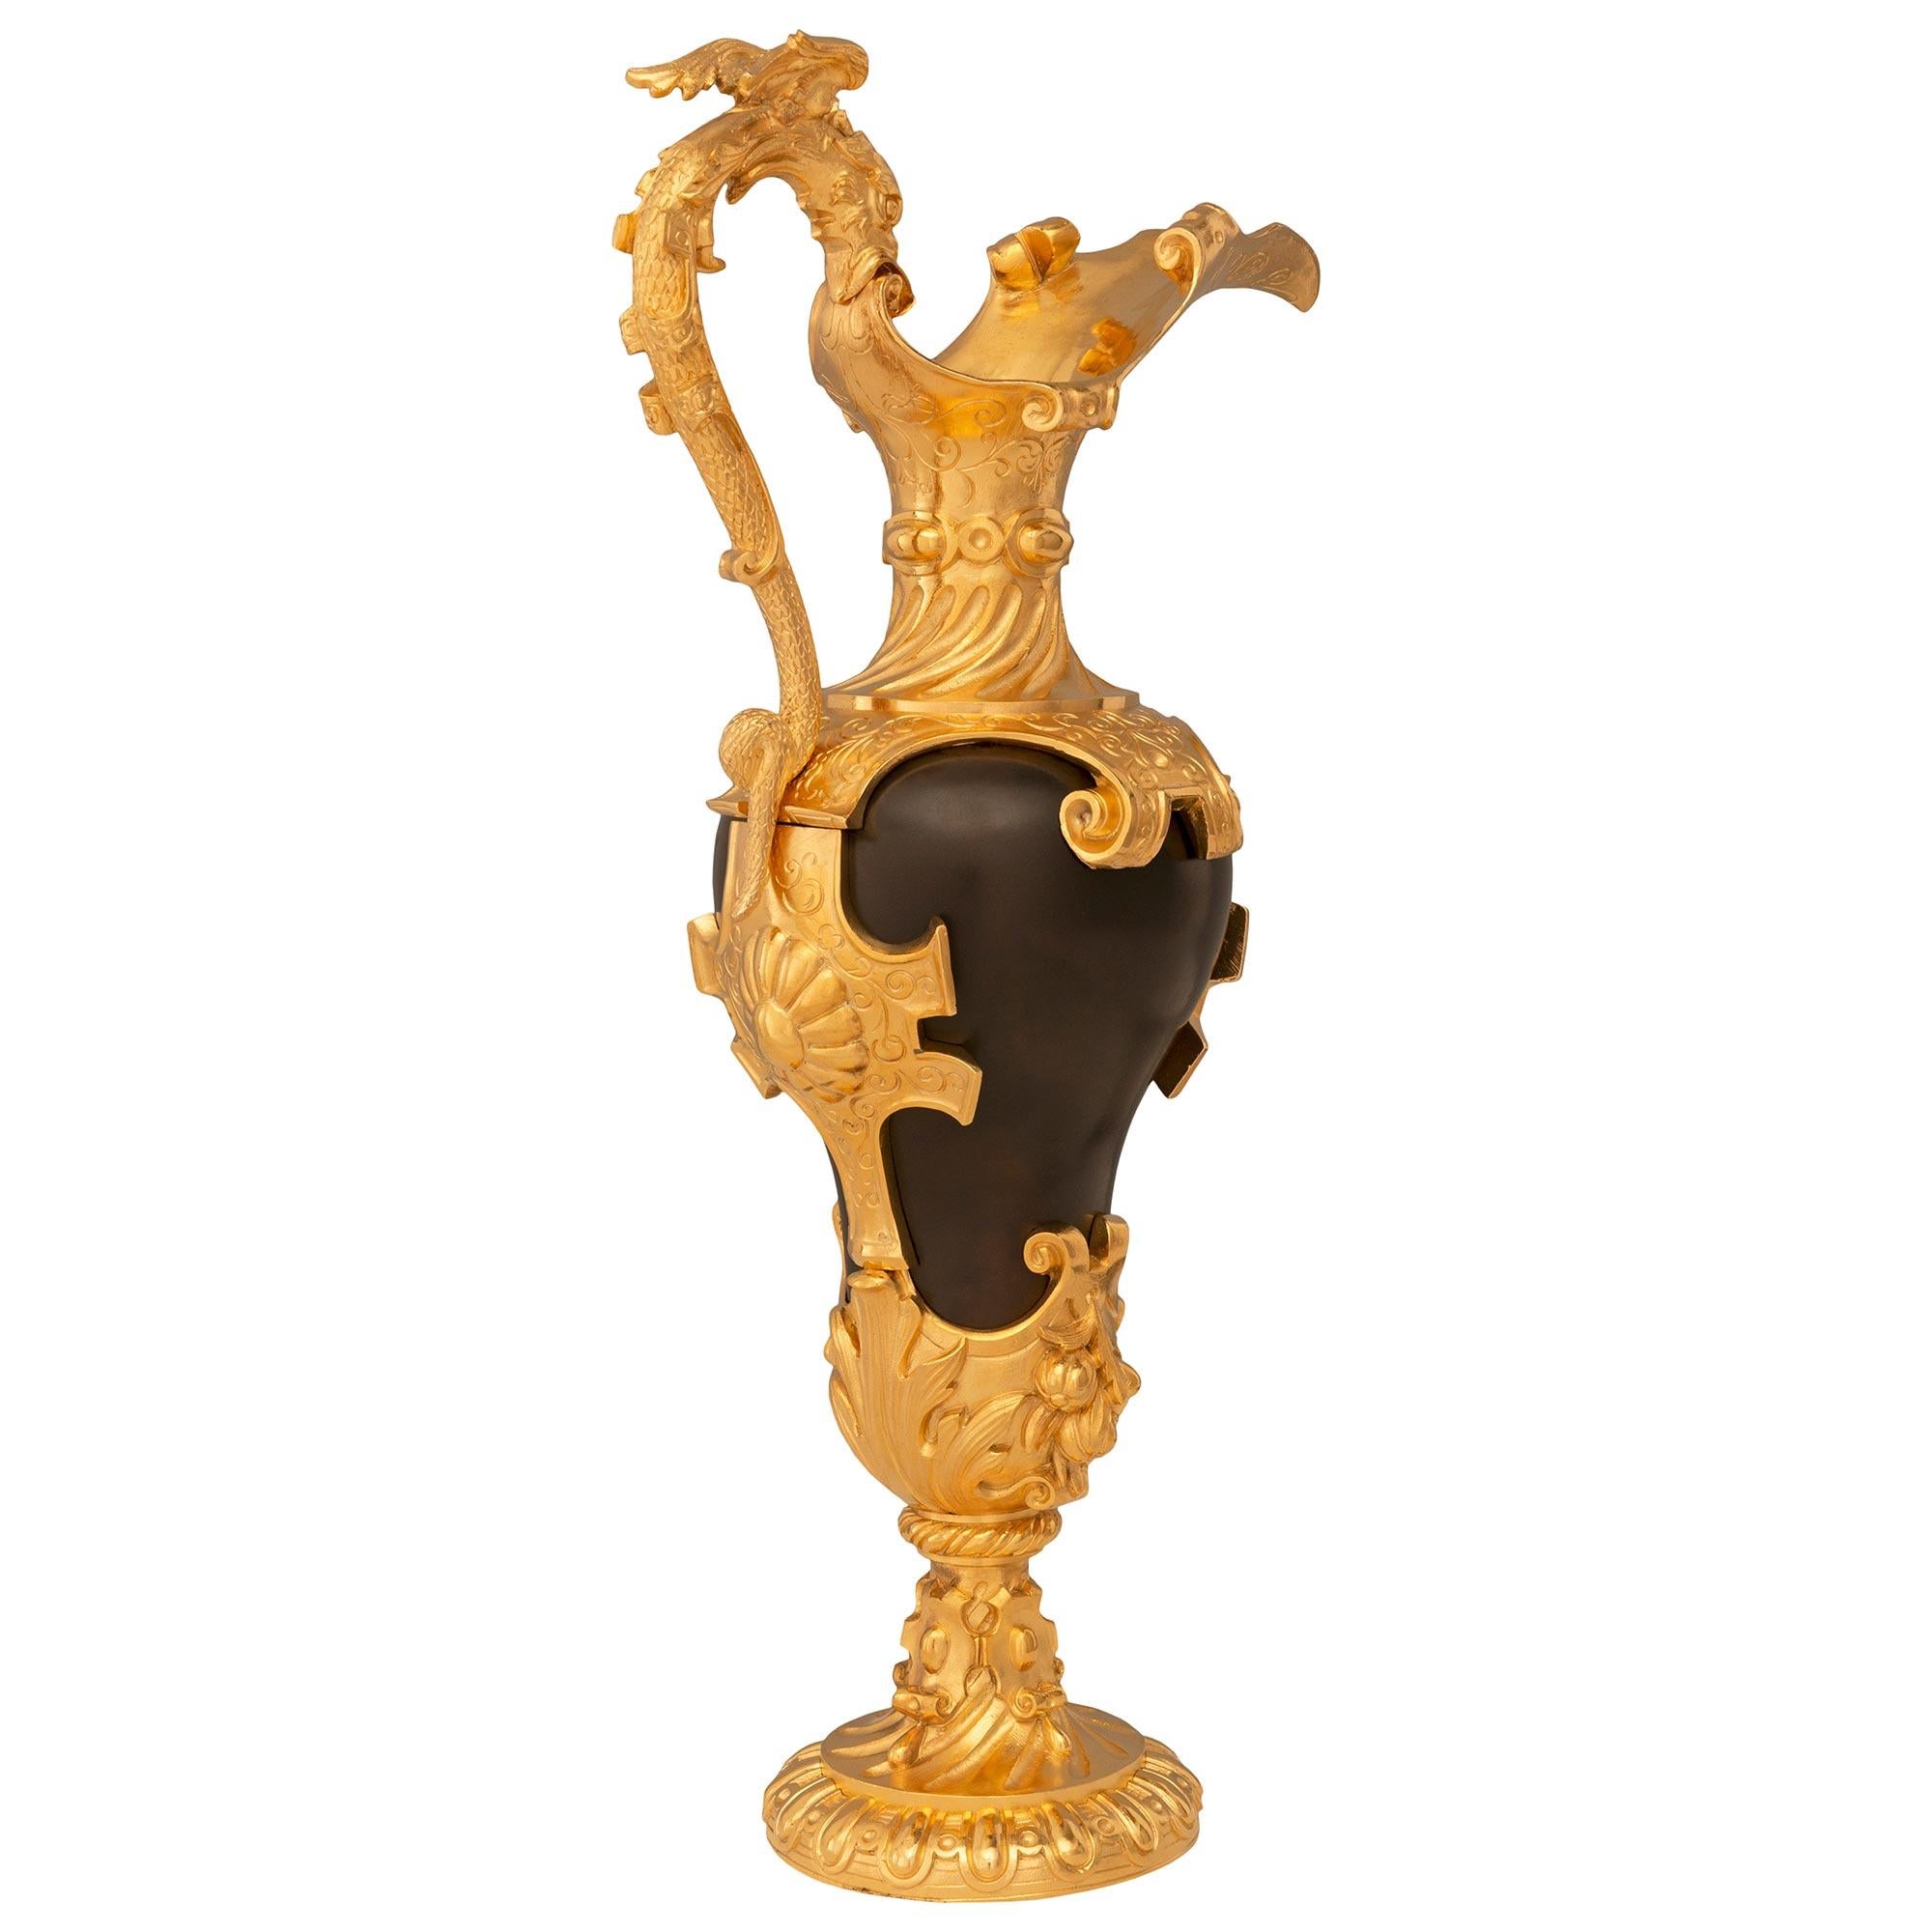 A striking true pair of French 19th century Renaissance st. ormolu and patinated bronze ewers. Each ewer is raised by a superb circular reeded base with a fine spiral fluted socle shaped pedestal support with family crest like reserves. The